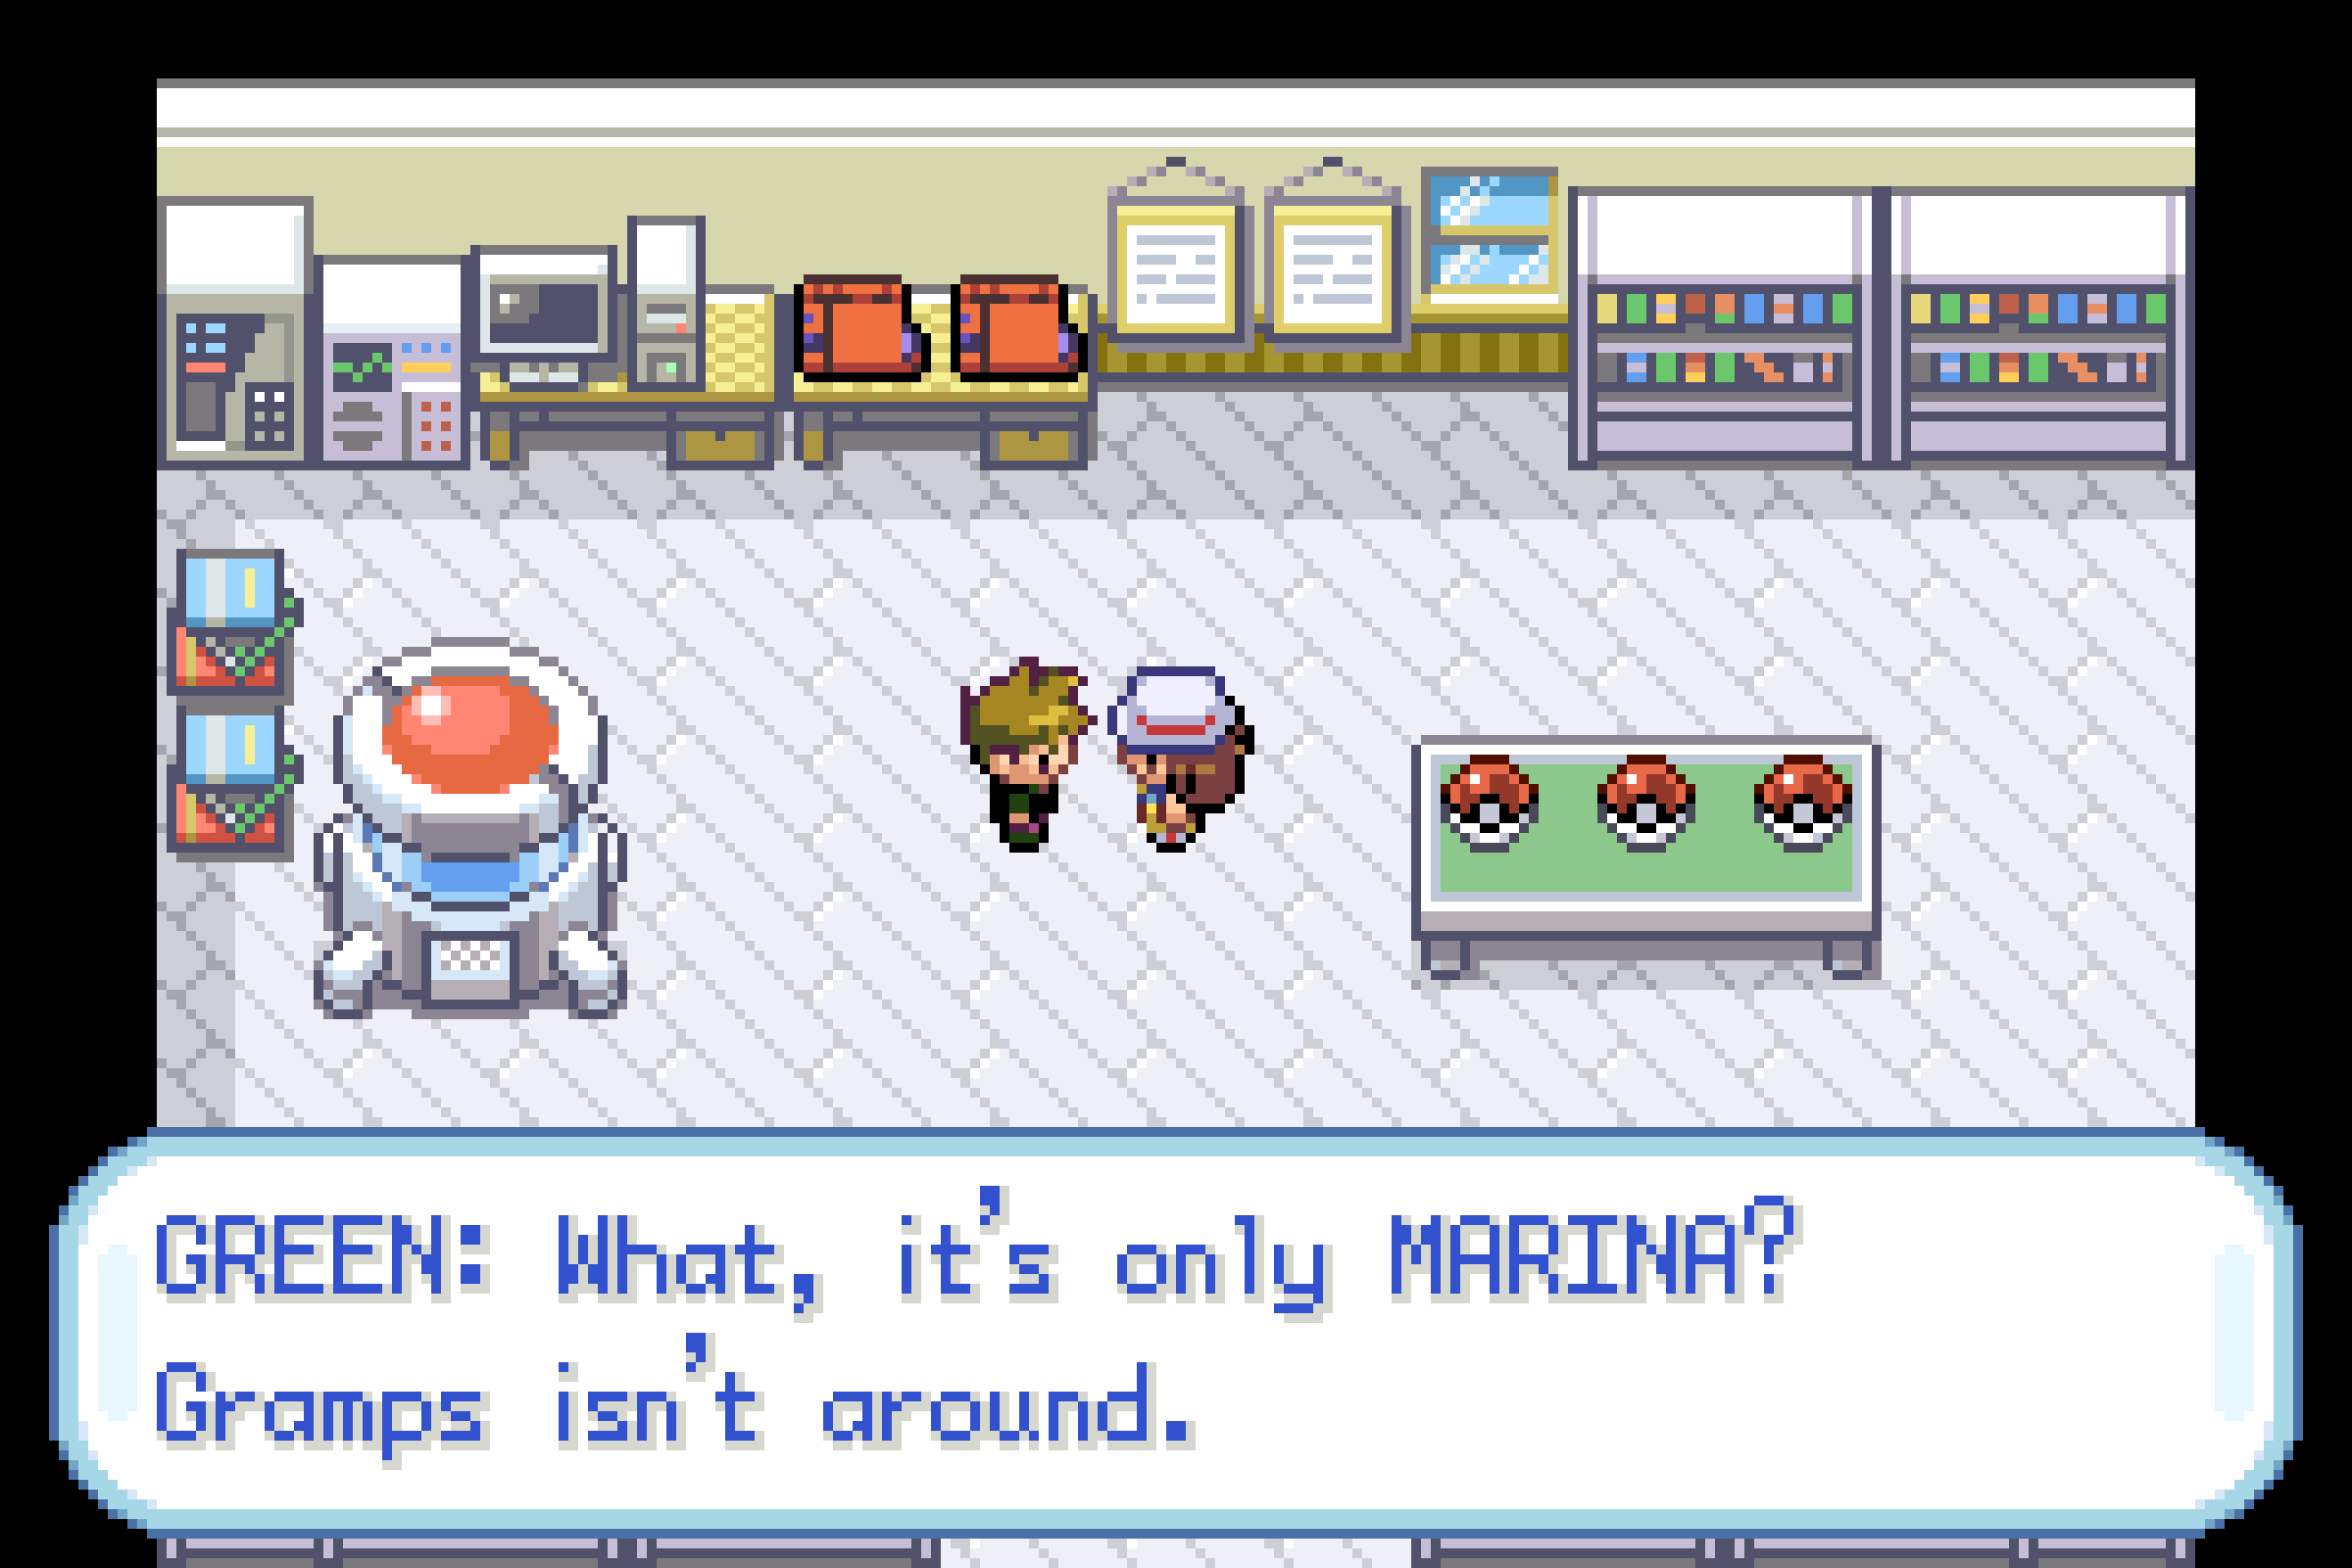 What, it's only Marina? Gramps isn't around.